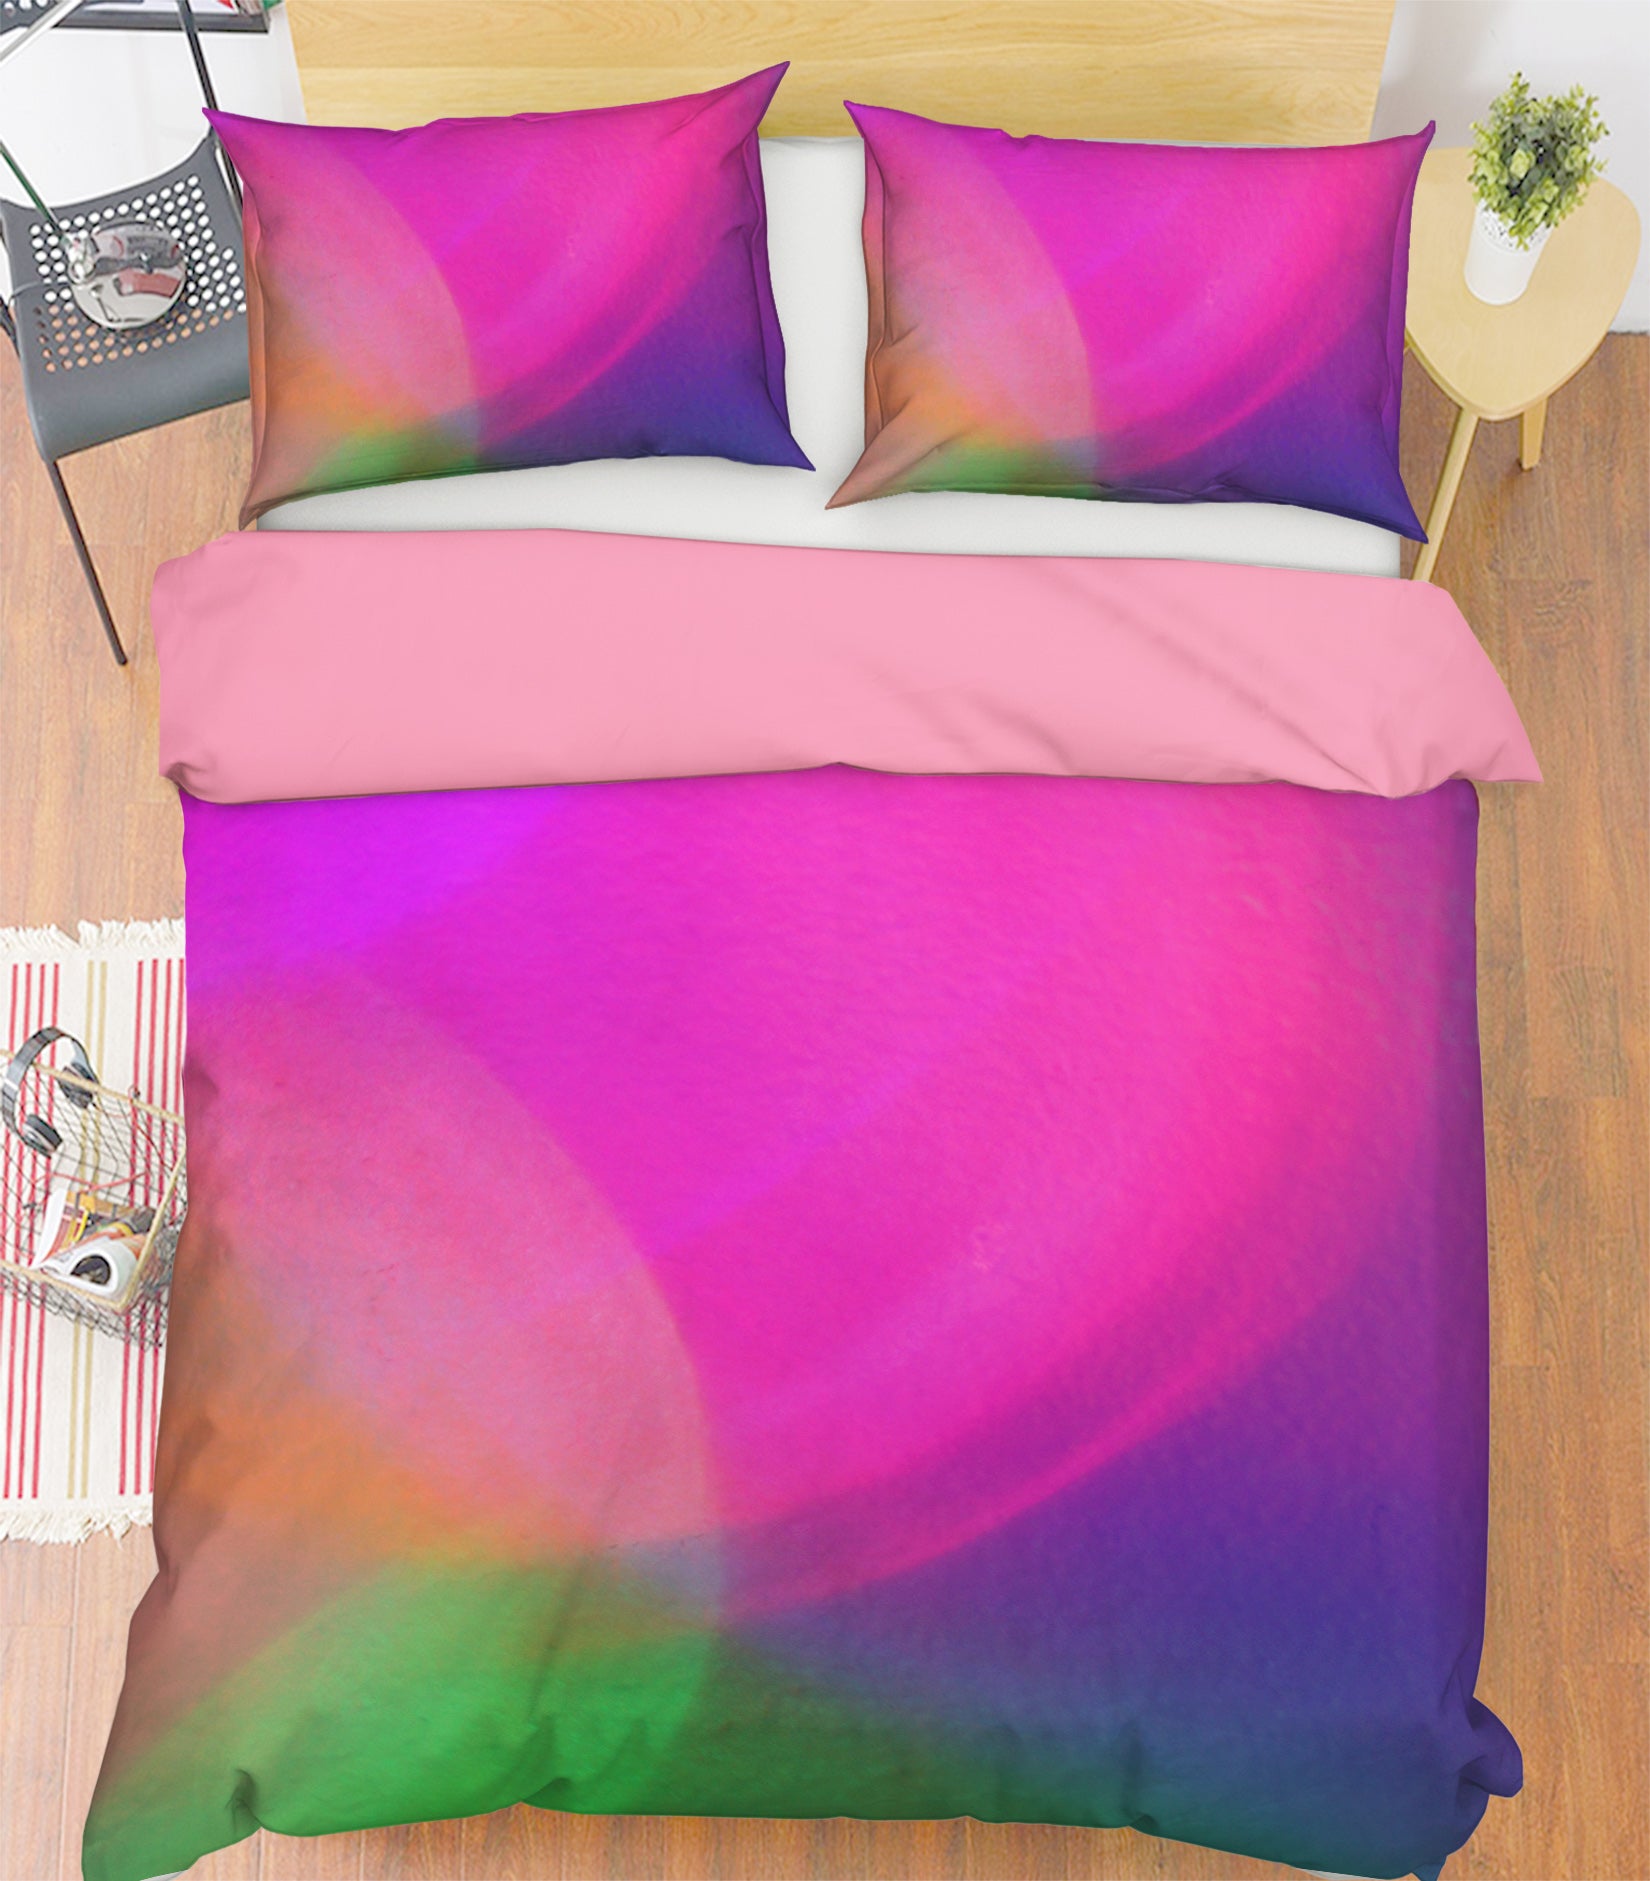 3D Colored 70167 Shandra Smith Bedding Bed Pillowcases Quilt